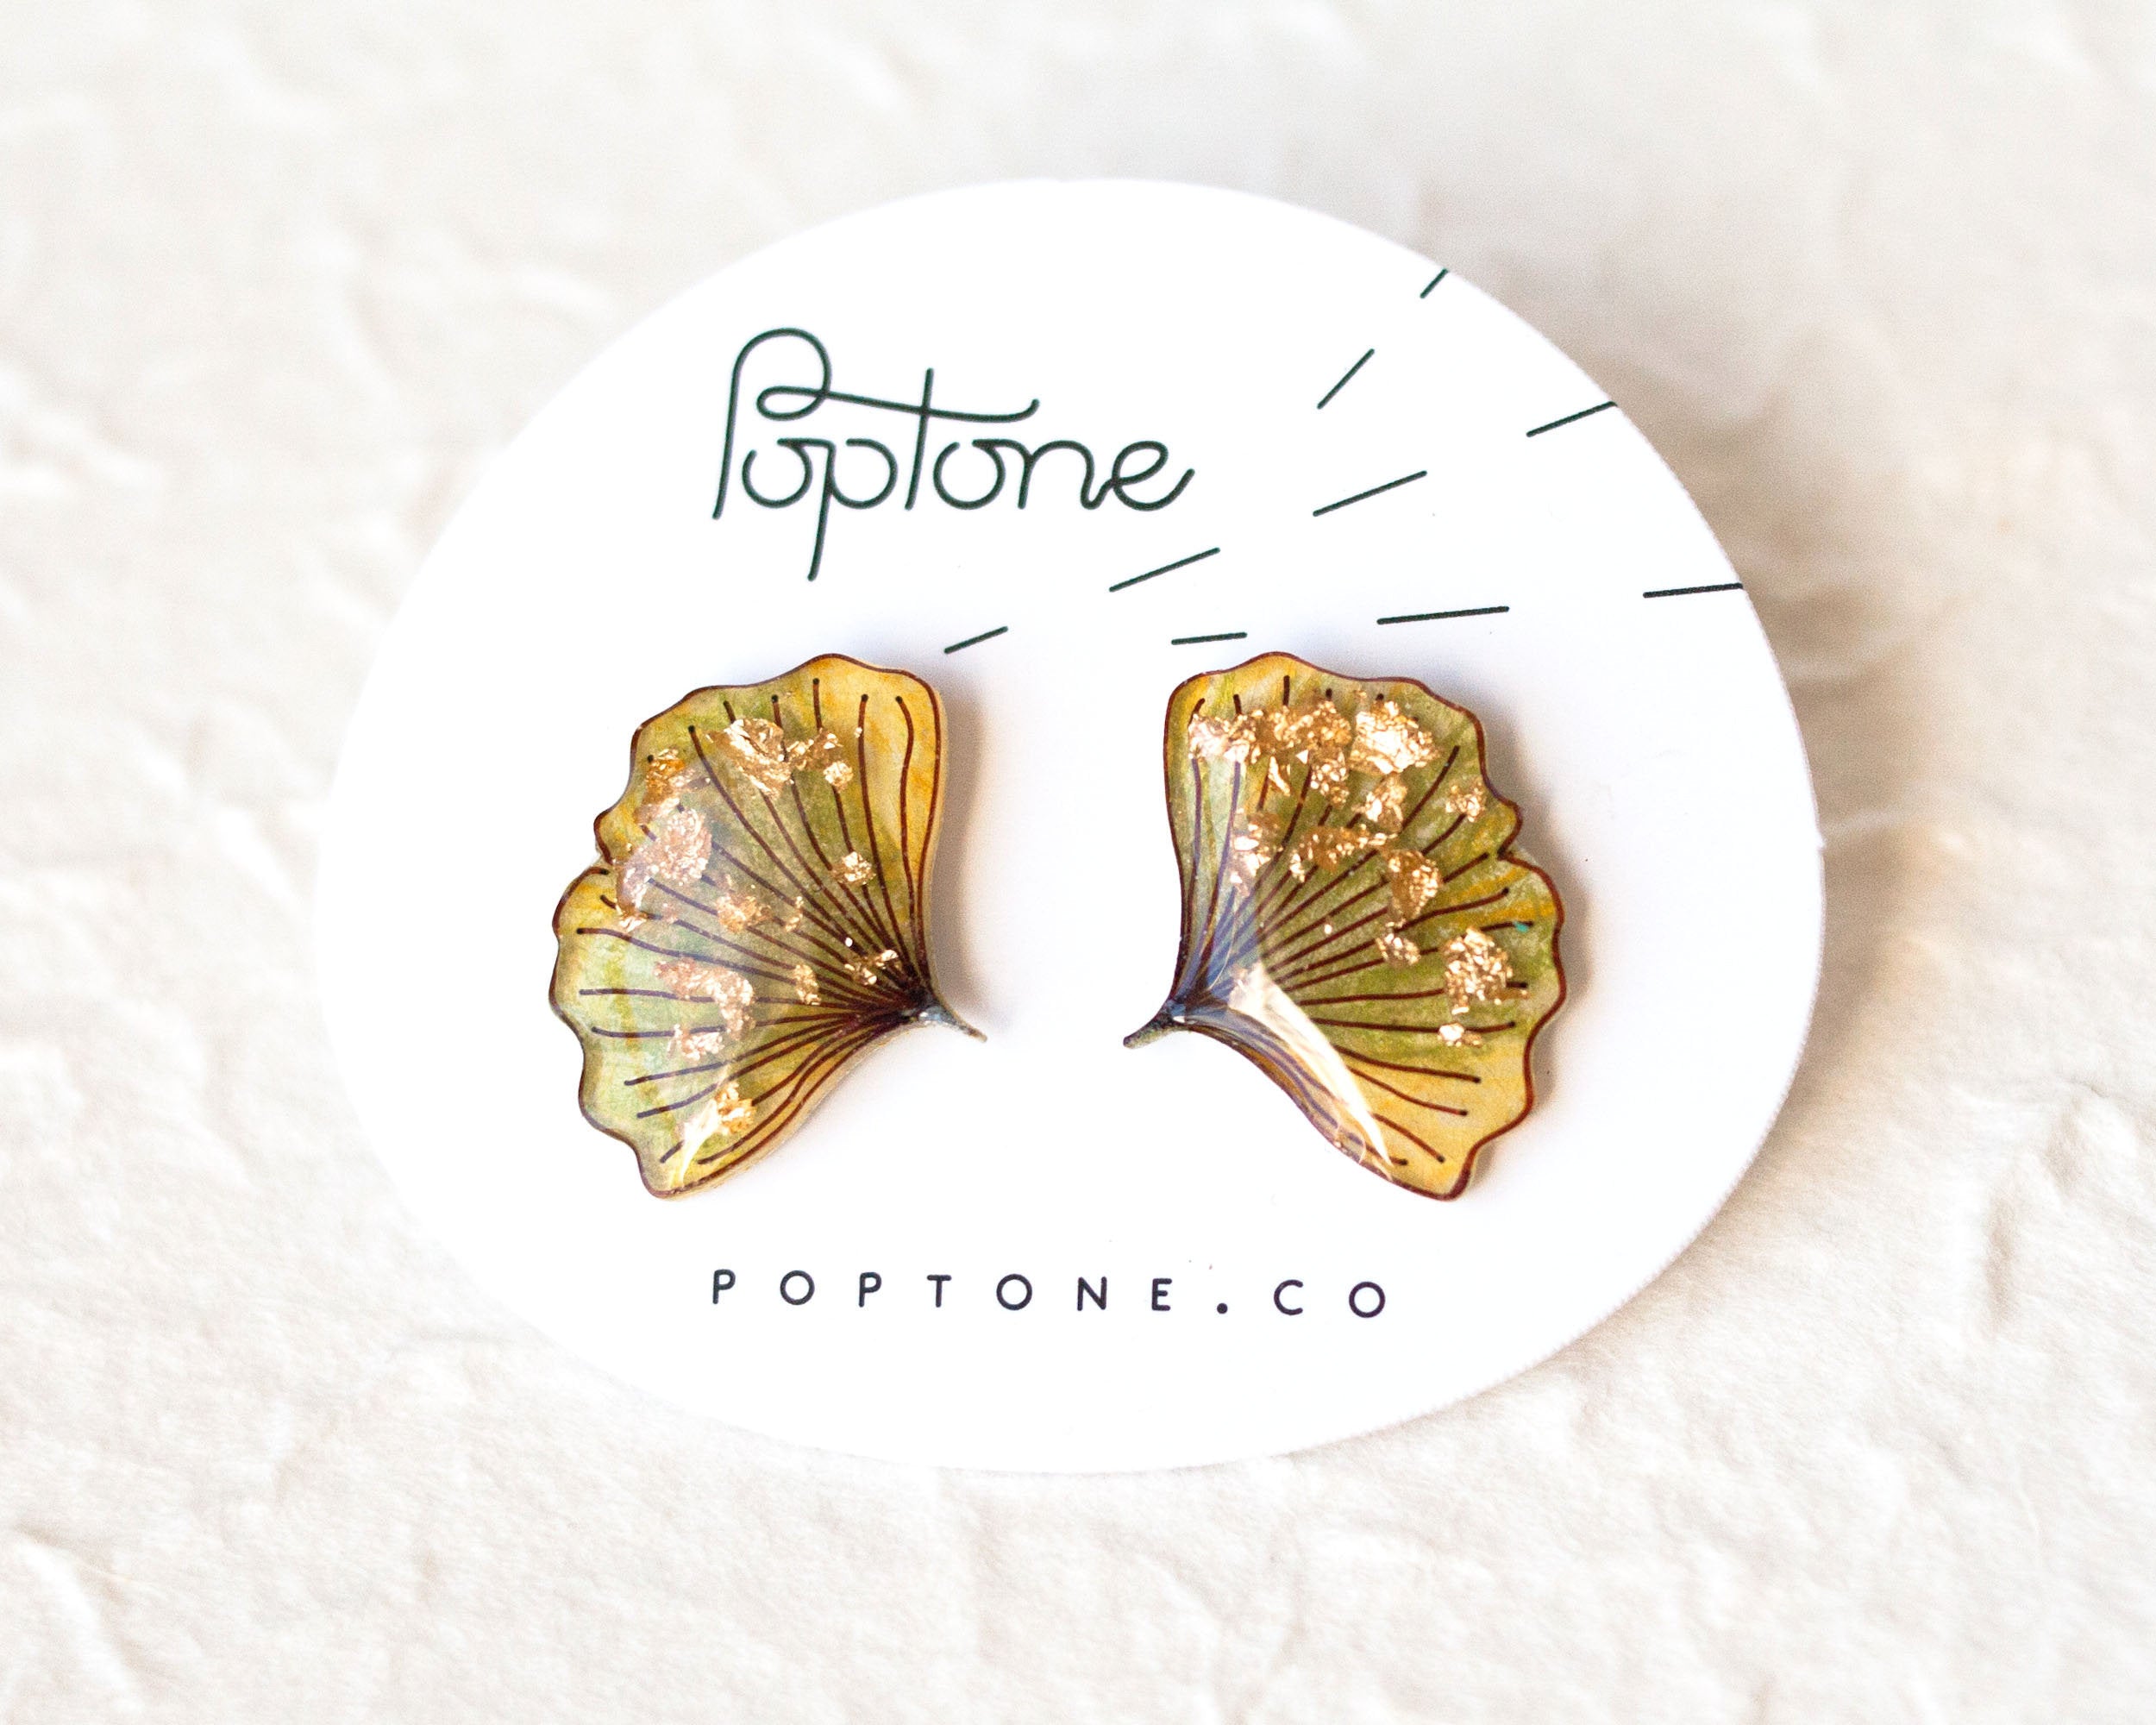 Ginkgo Biloba Leaf Statement Stud Earrings with Gold Accents